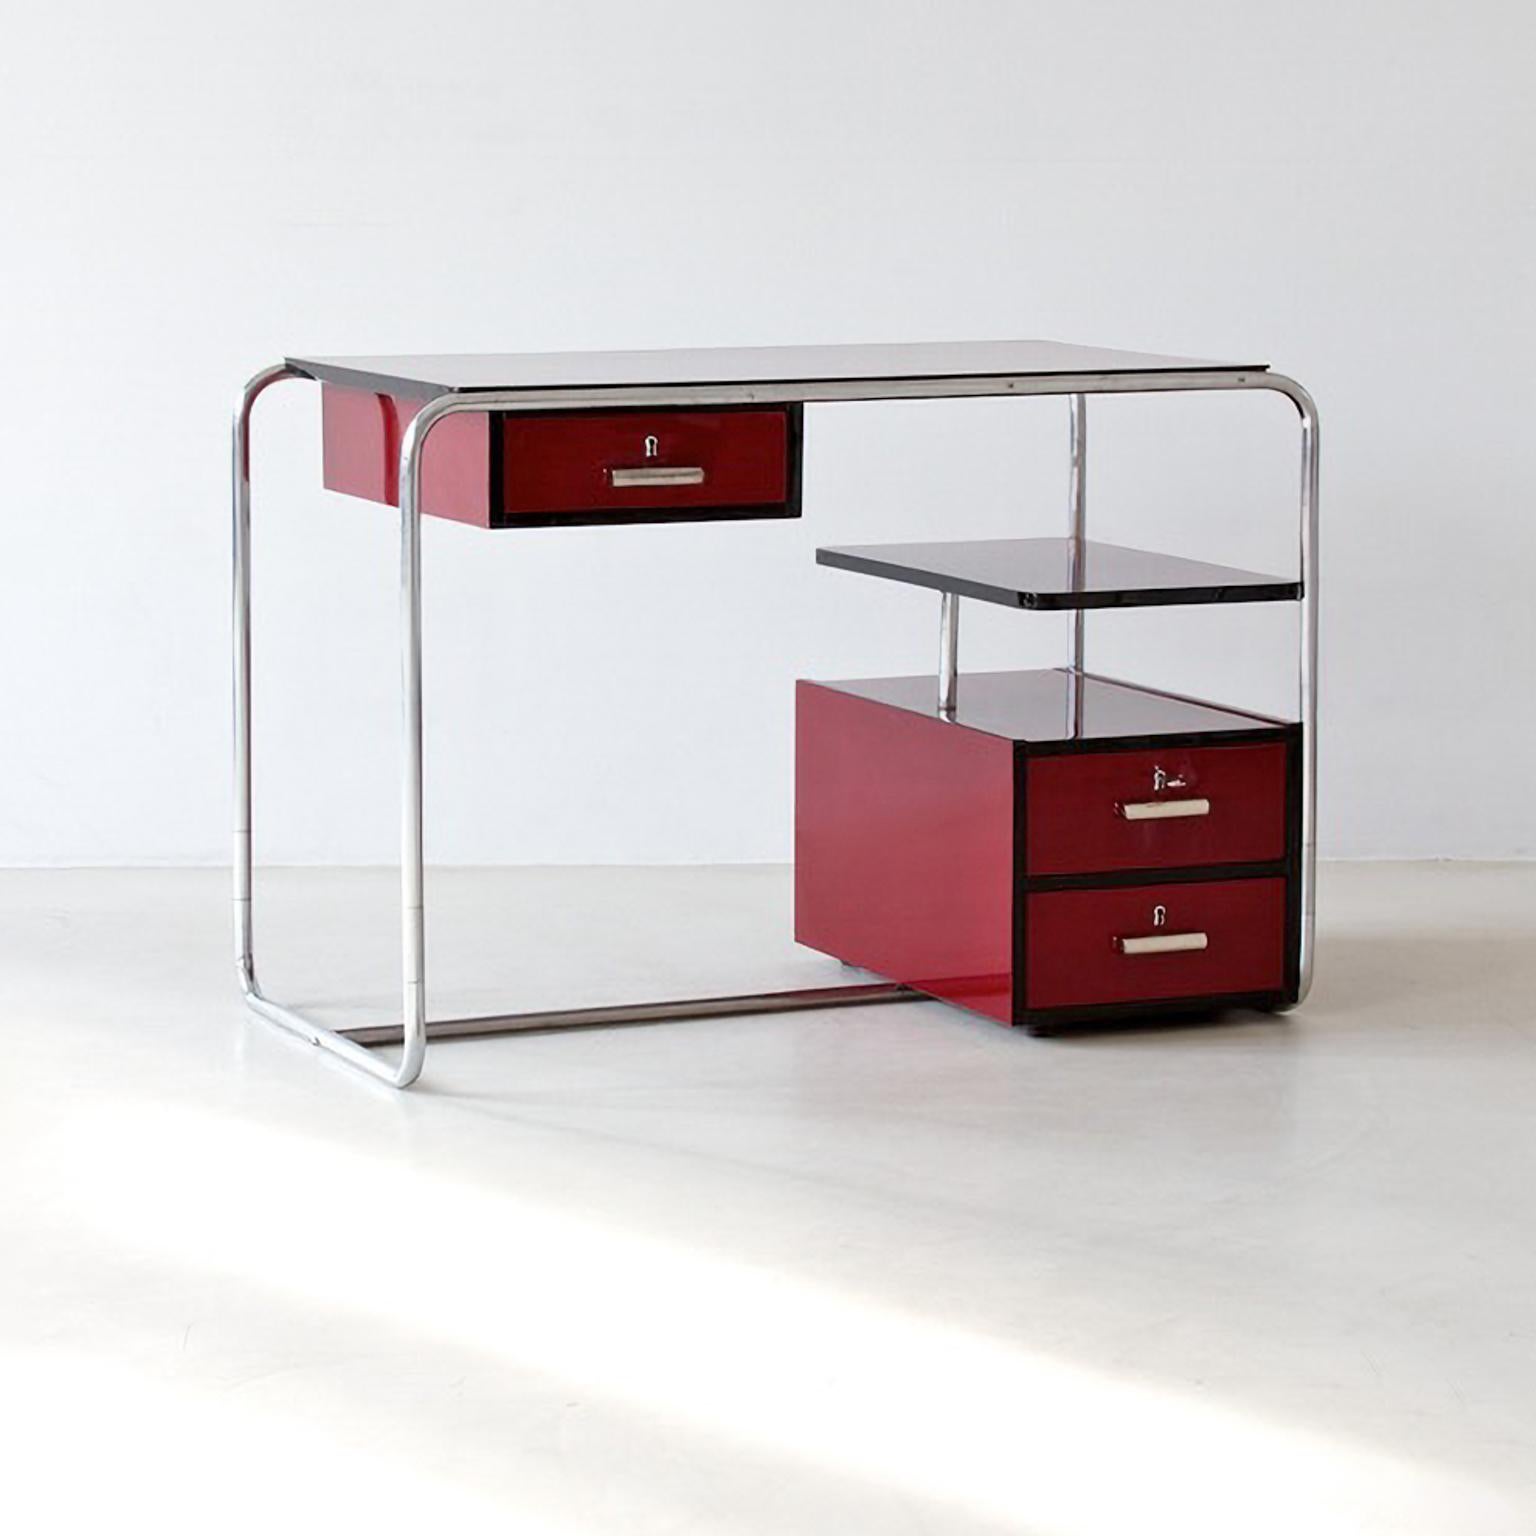 Modernist tubular steel desk in glossy lacquered wood and plated metal, c. 1950.
The wood finish is customizable, delivery time c. 8-12 weeks.